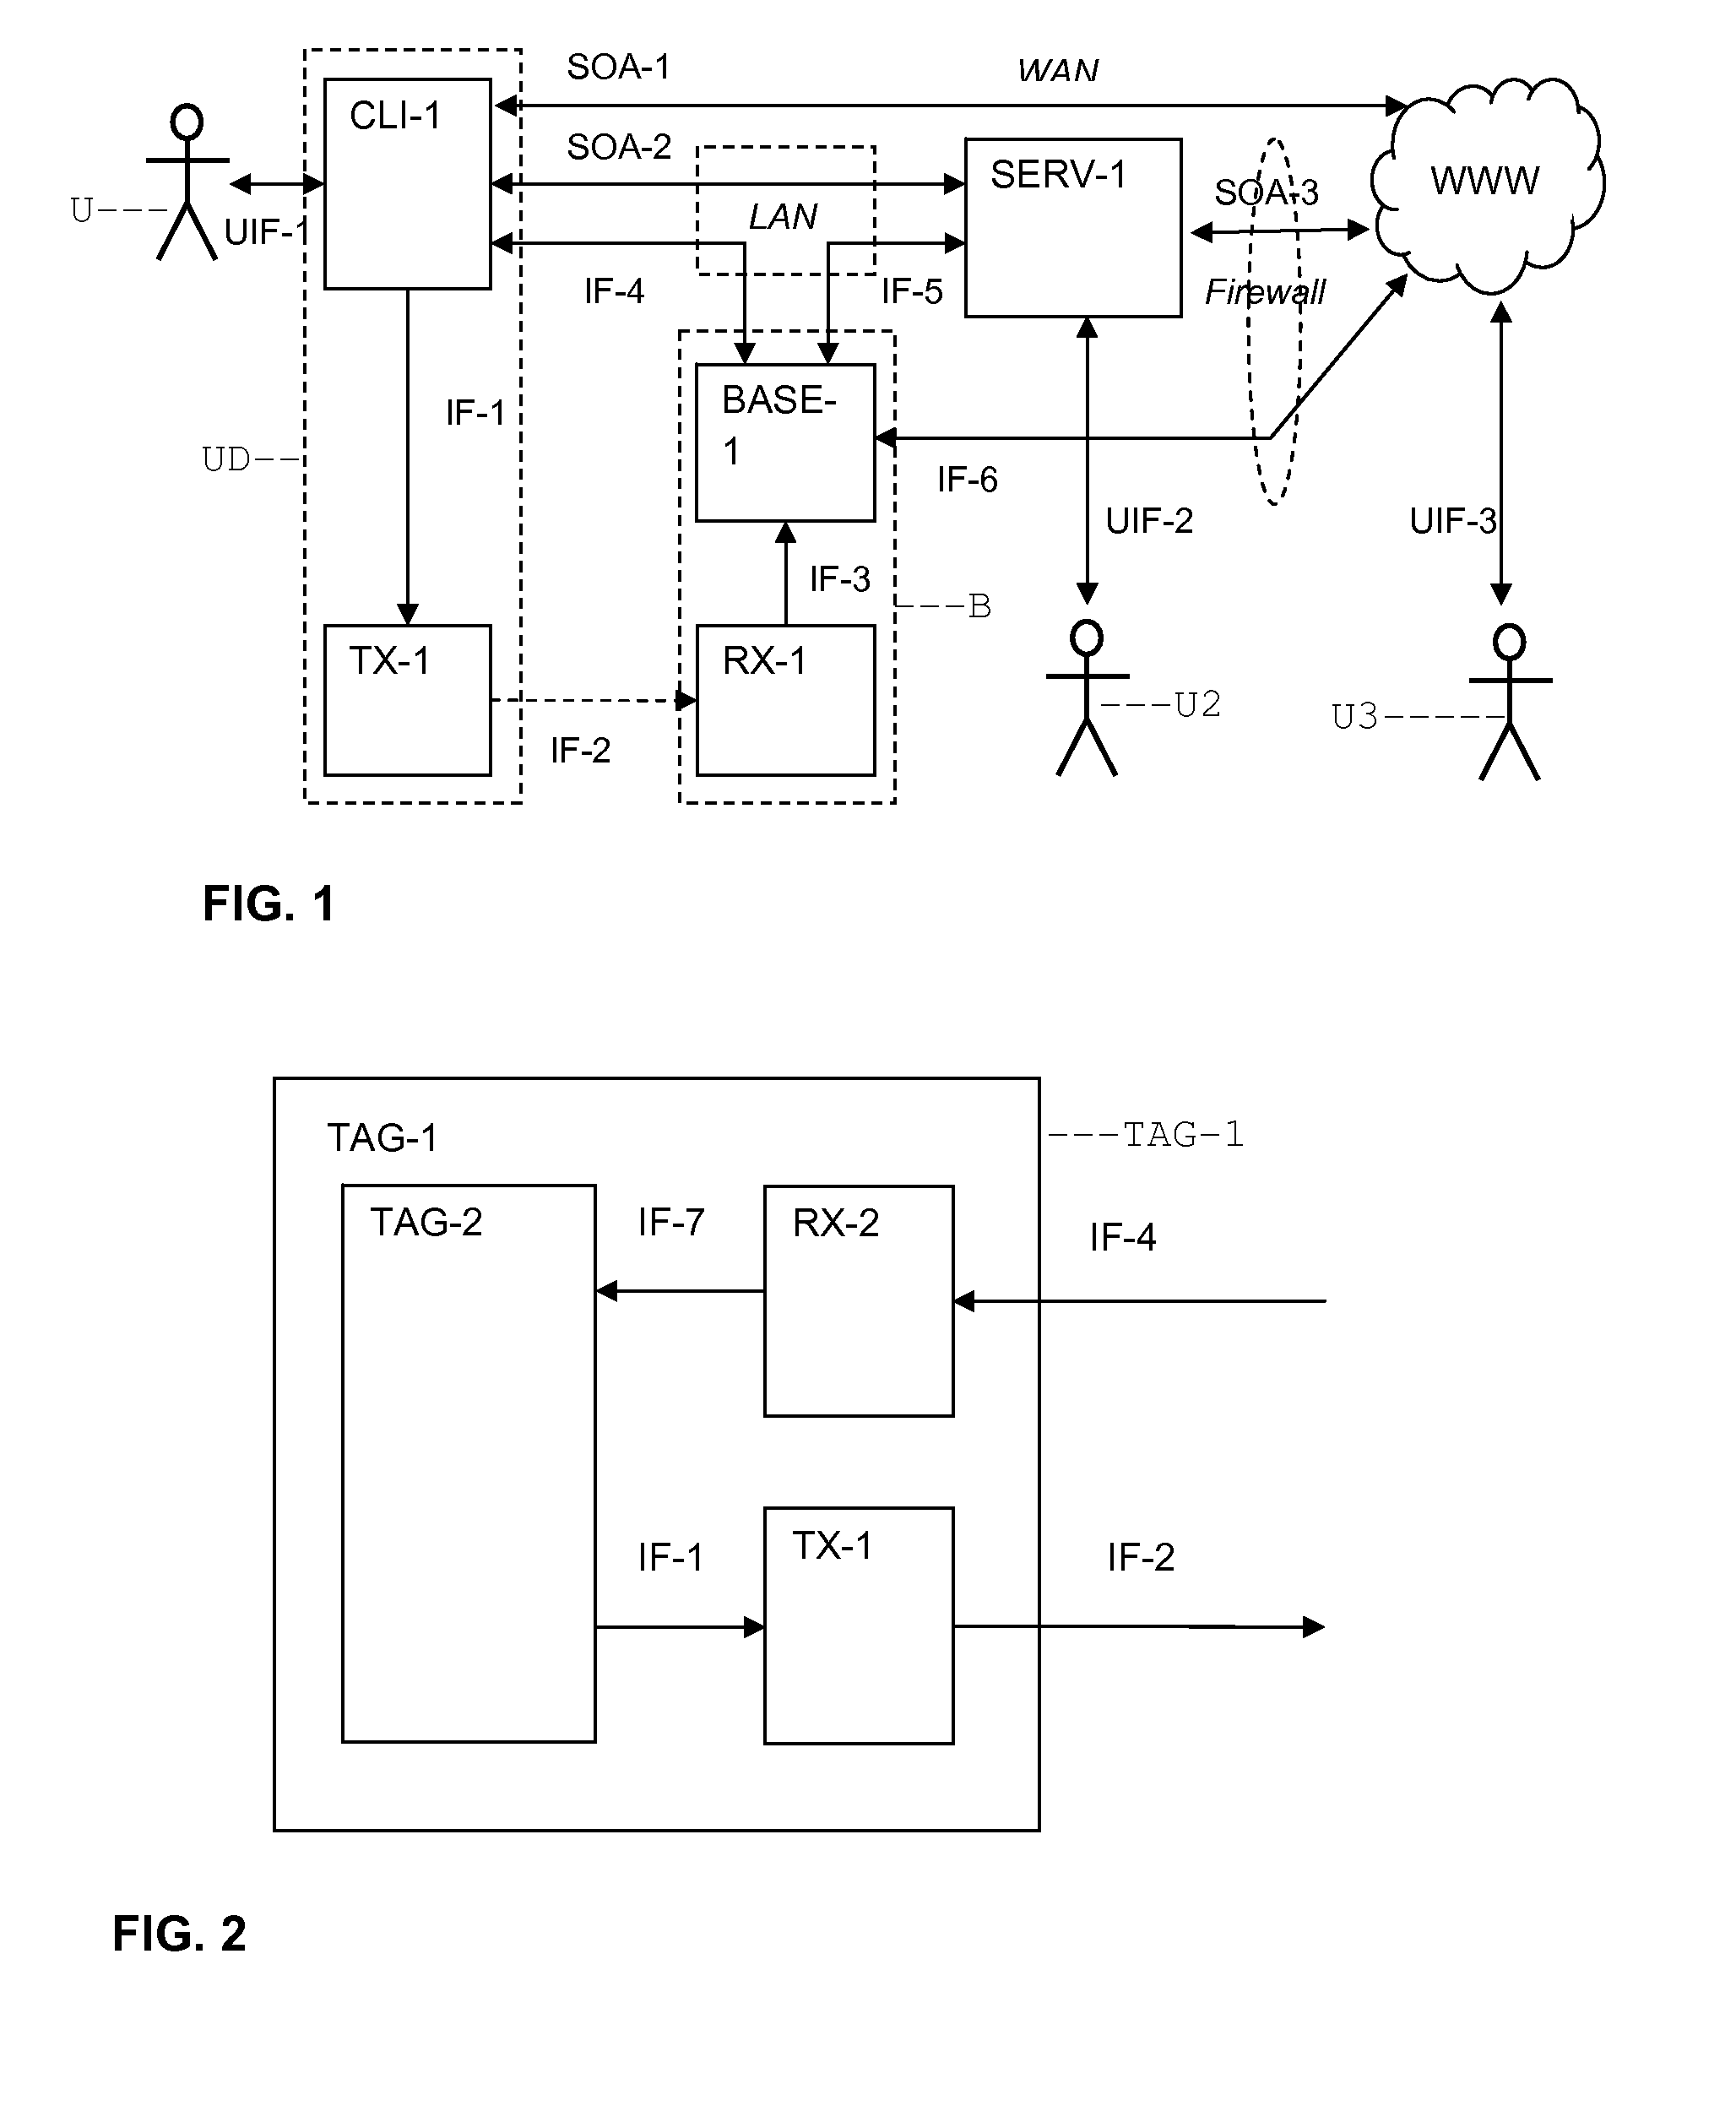 Ultrasonic in-building positioning system based on phase difference array with ranging